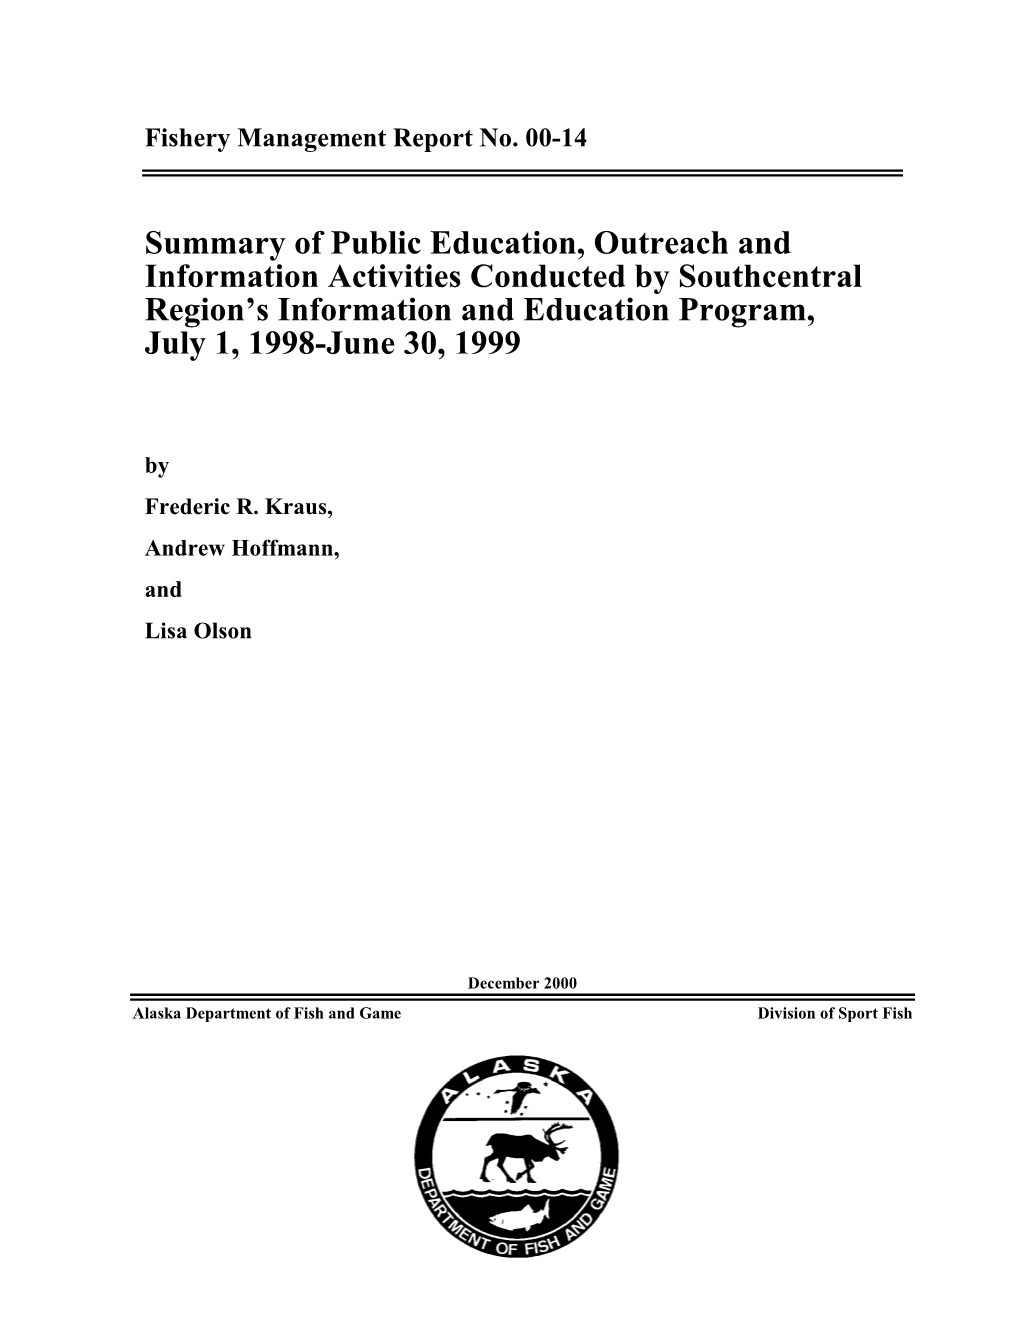 Summary of Public Education, Outreach and Information Activities Conducted by Southcentral Region’S Information and Education Program, July 1, 1998-June 30, 1999